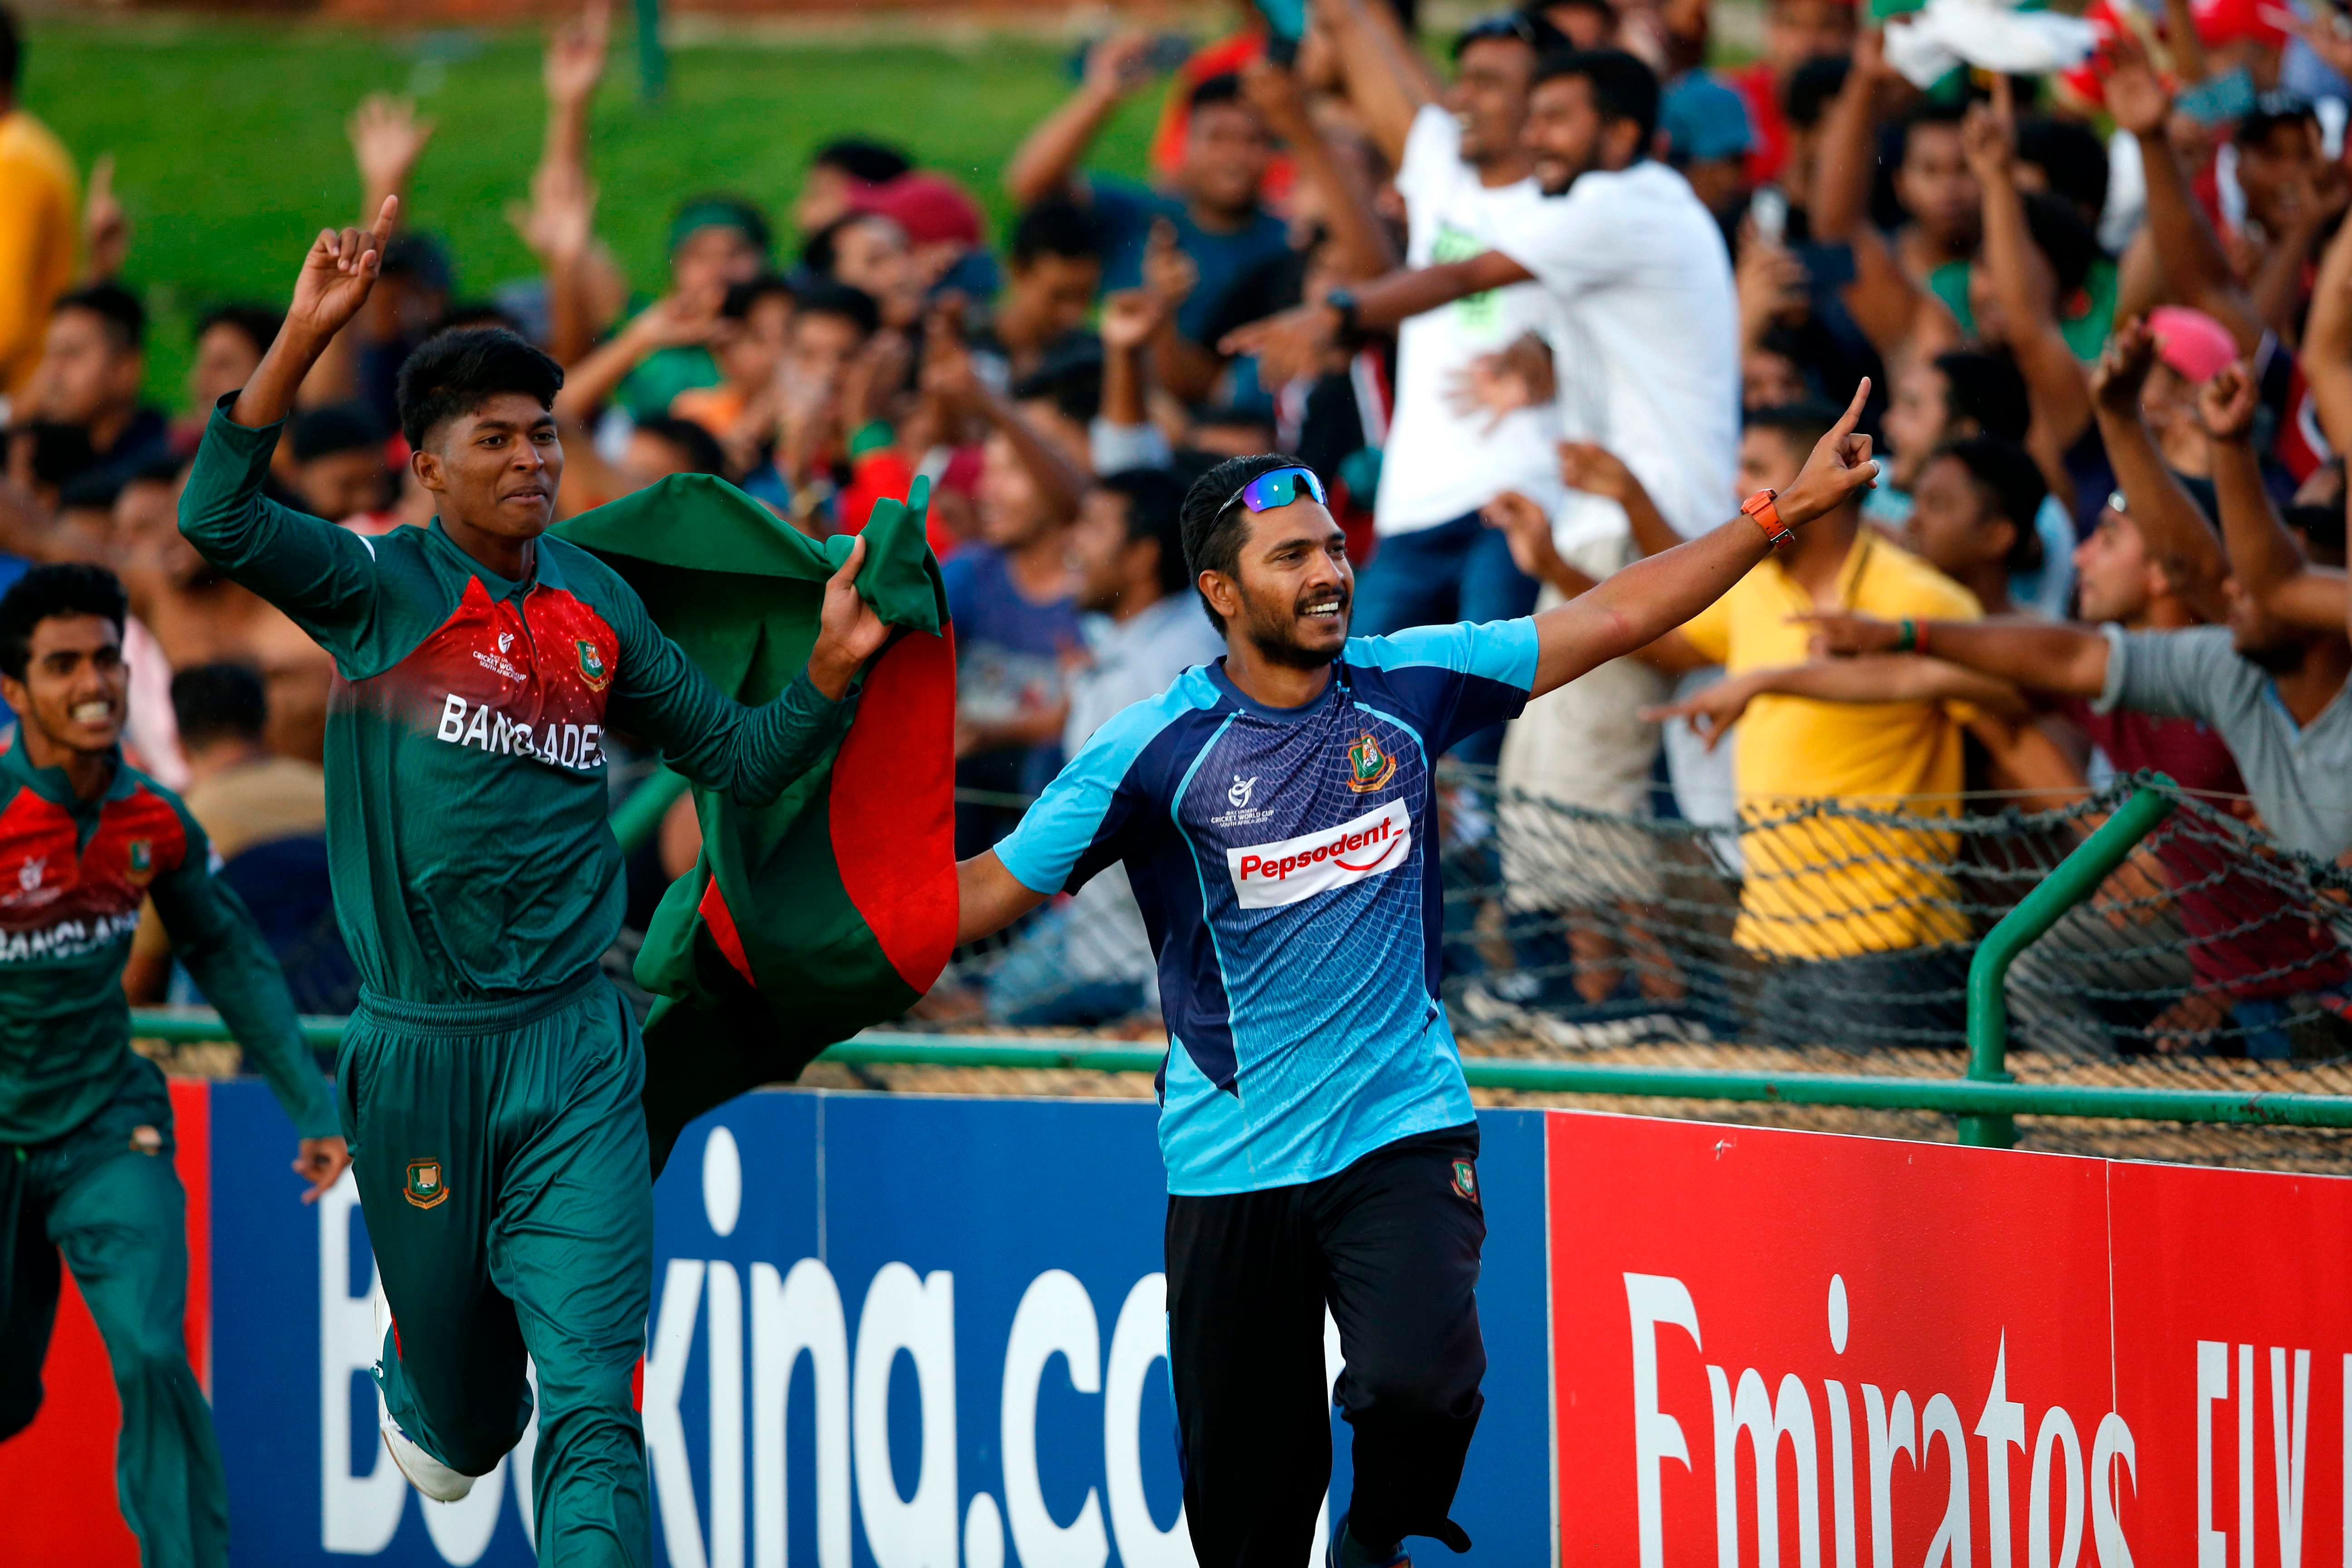 Bangladesh cricket players react after winning the ICC Under-19 World Cup cricket finals between India and Bangladesh at the Senwes Park, in Potchefstroom. (AFP Photo)